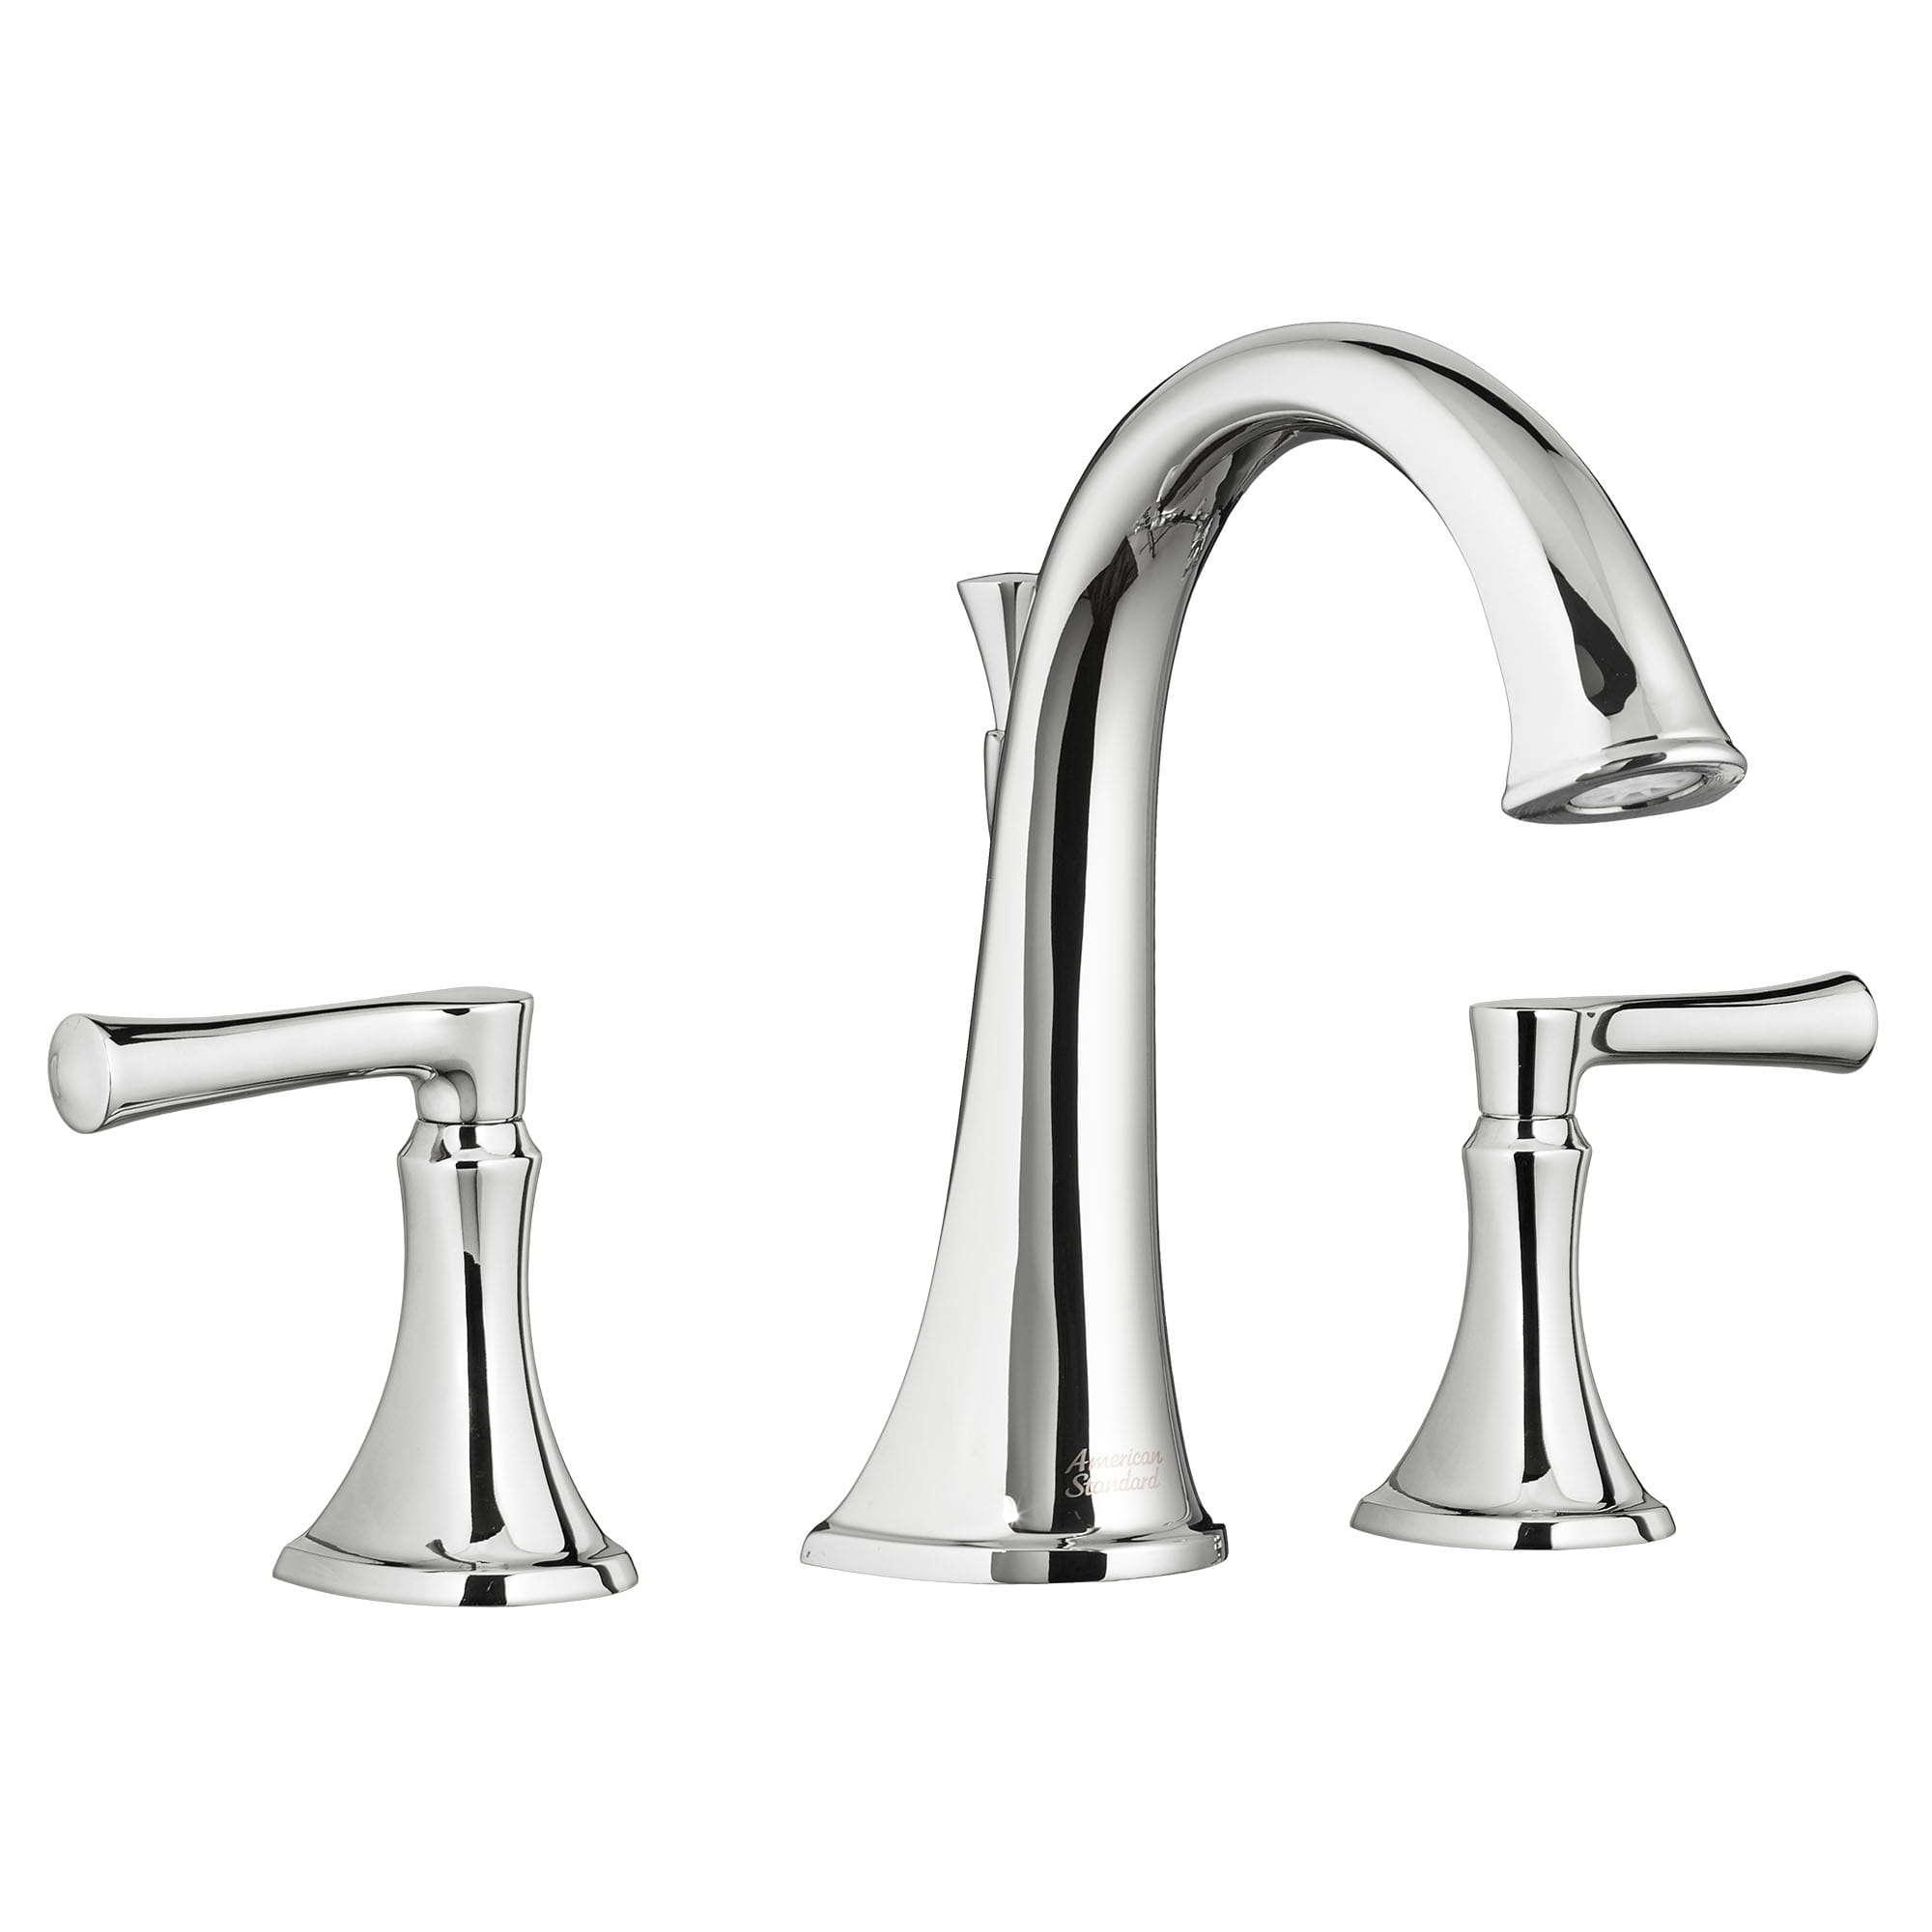 Estate Bathtub Faucet for Flash Rough In Valve With Lever Handles CHROME